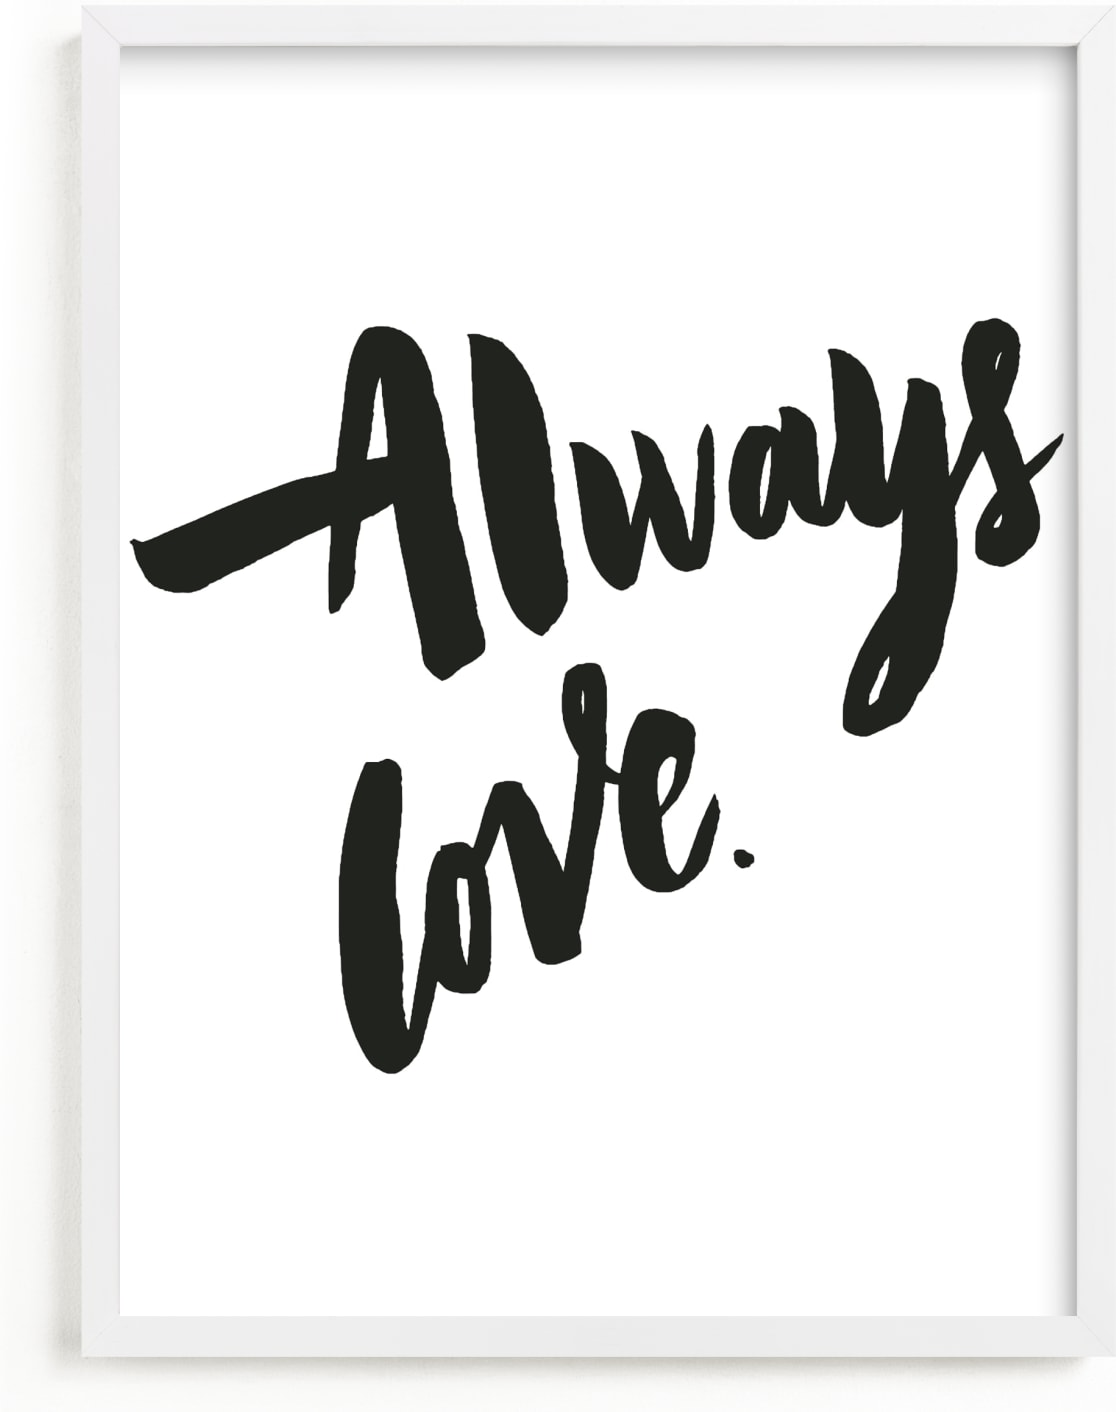 This is a black and white art by Maria Clarisse called Always Love.